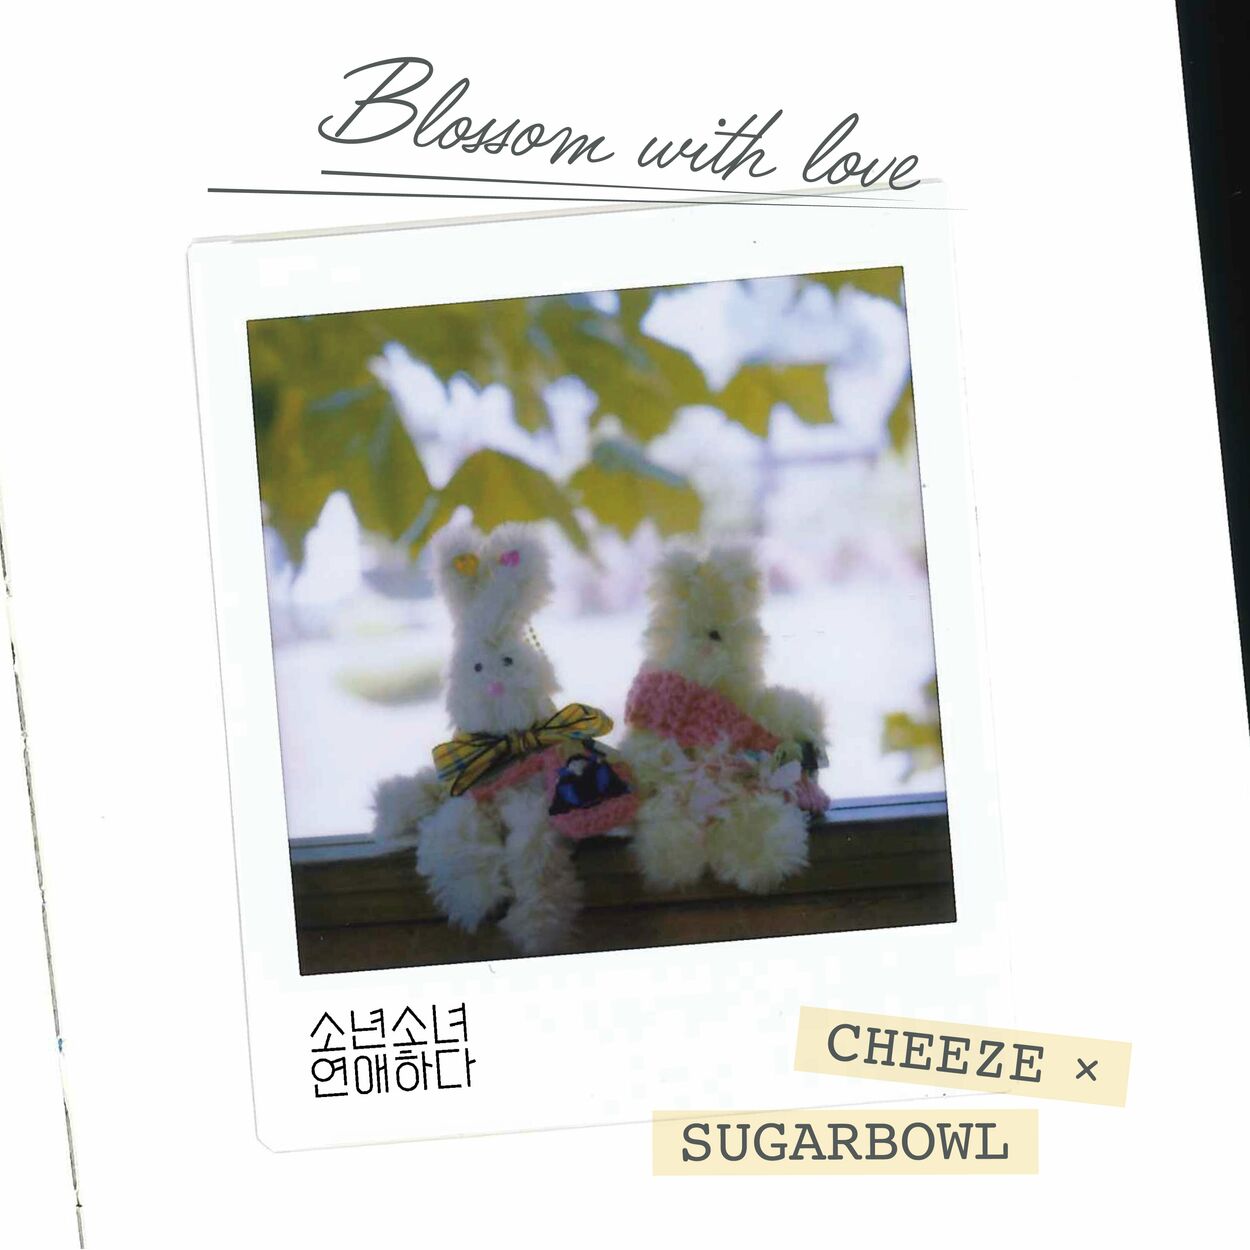 Cheeze – Blossom with Love, Pt. 2 OST